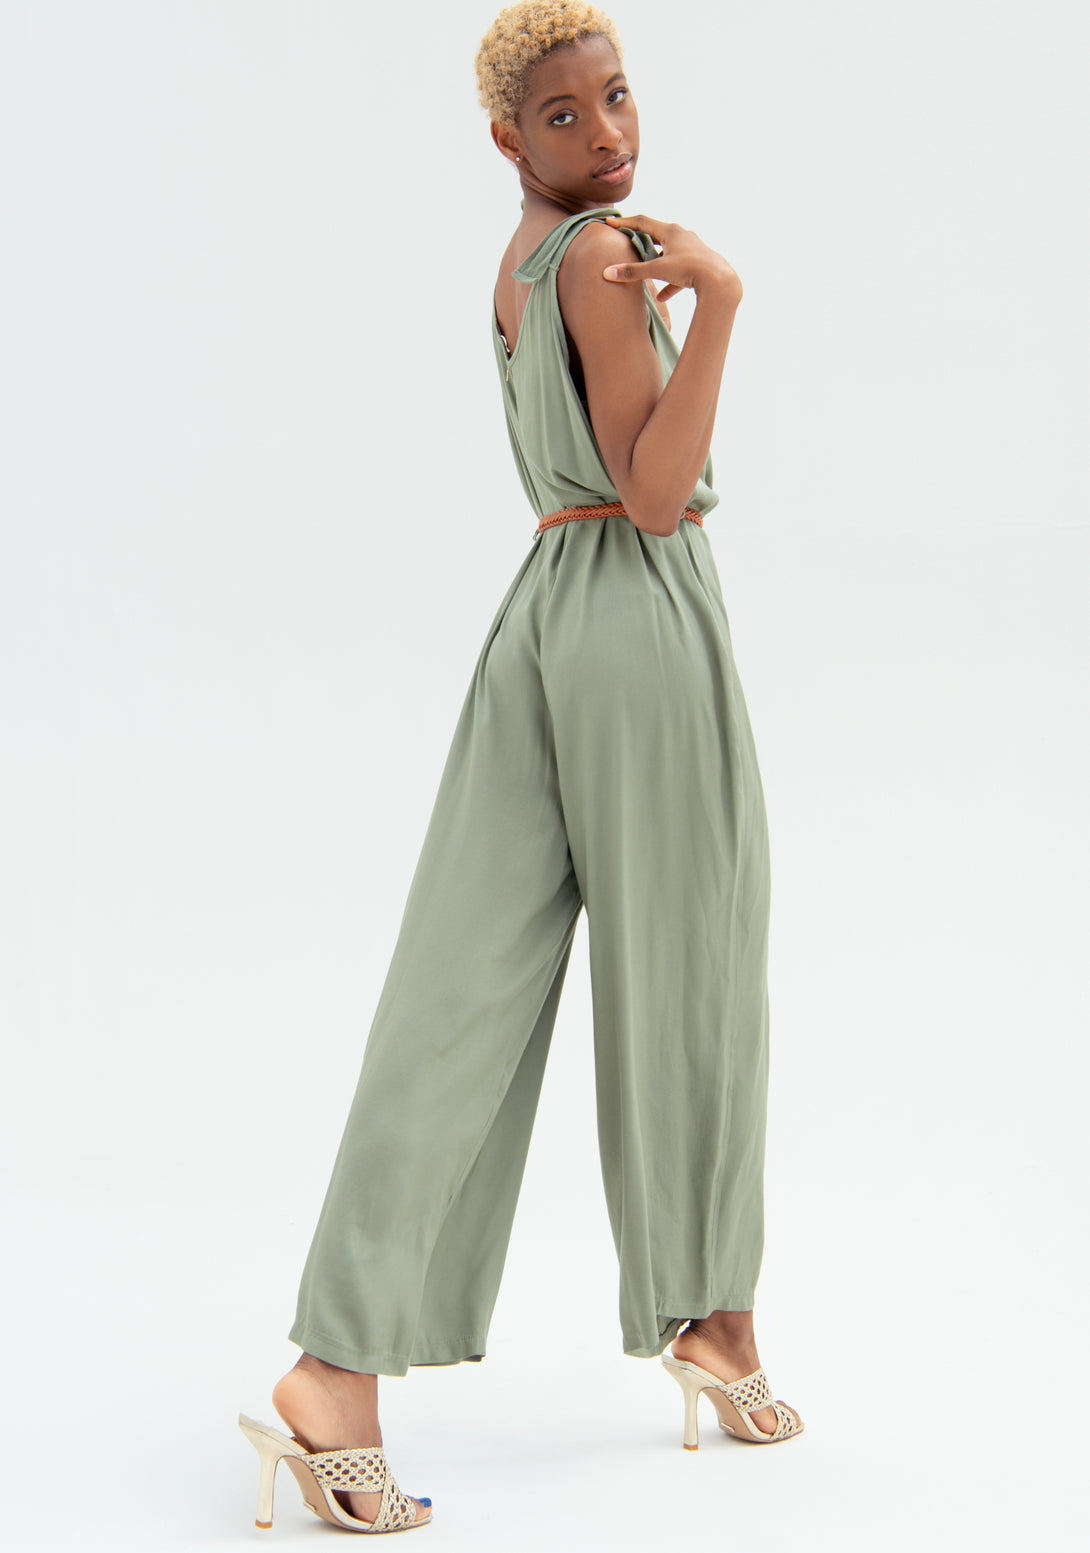 Jumpsuit regular fit with no sleeves